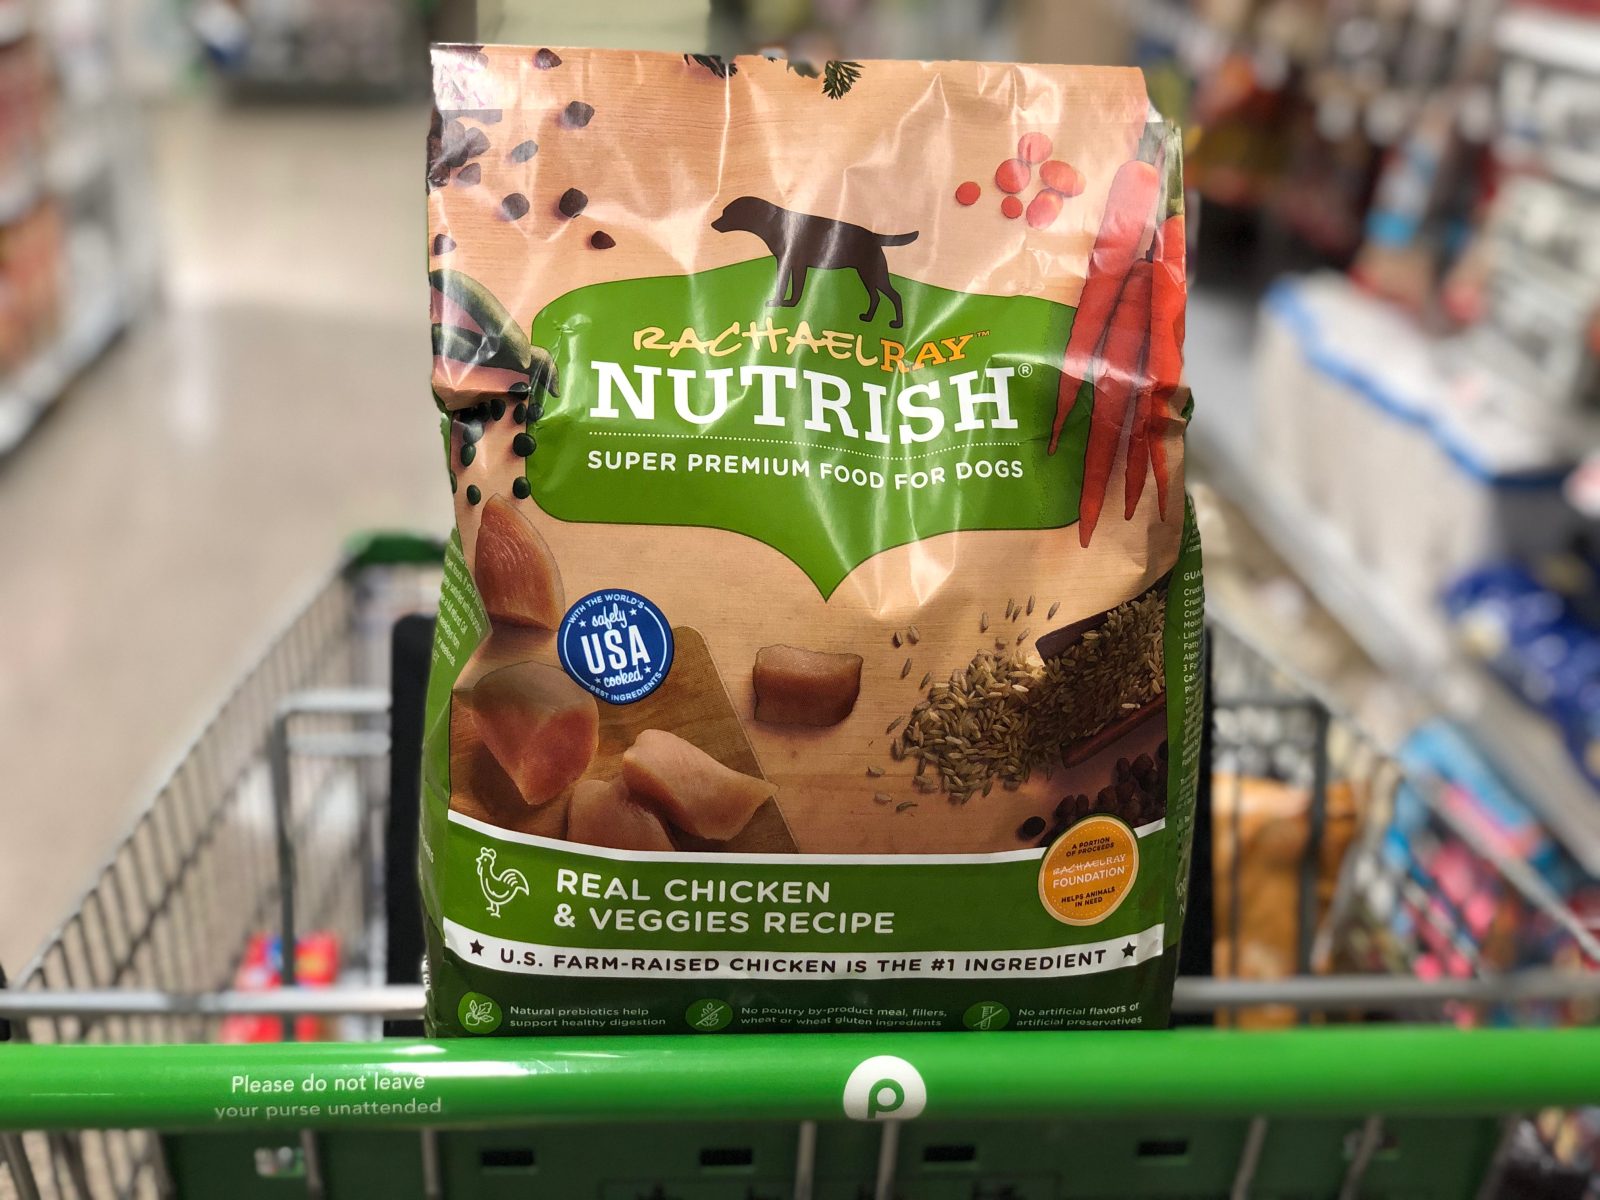 Rachael Ray Nutrish Food For Dogs Just $4.42 At Publix